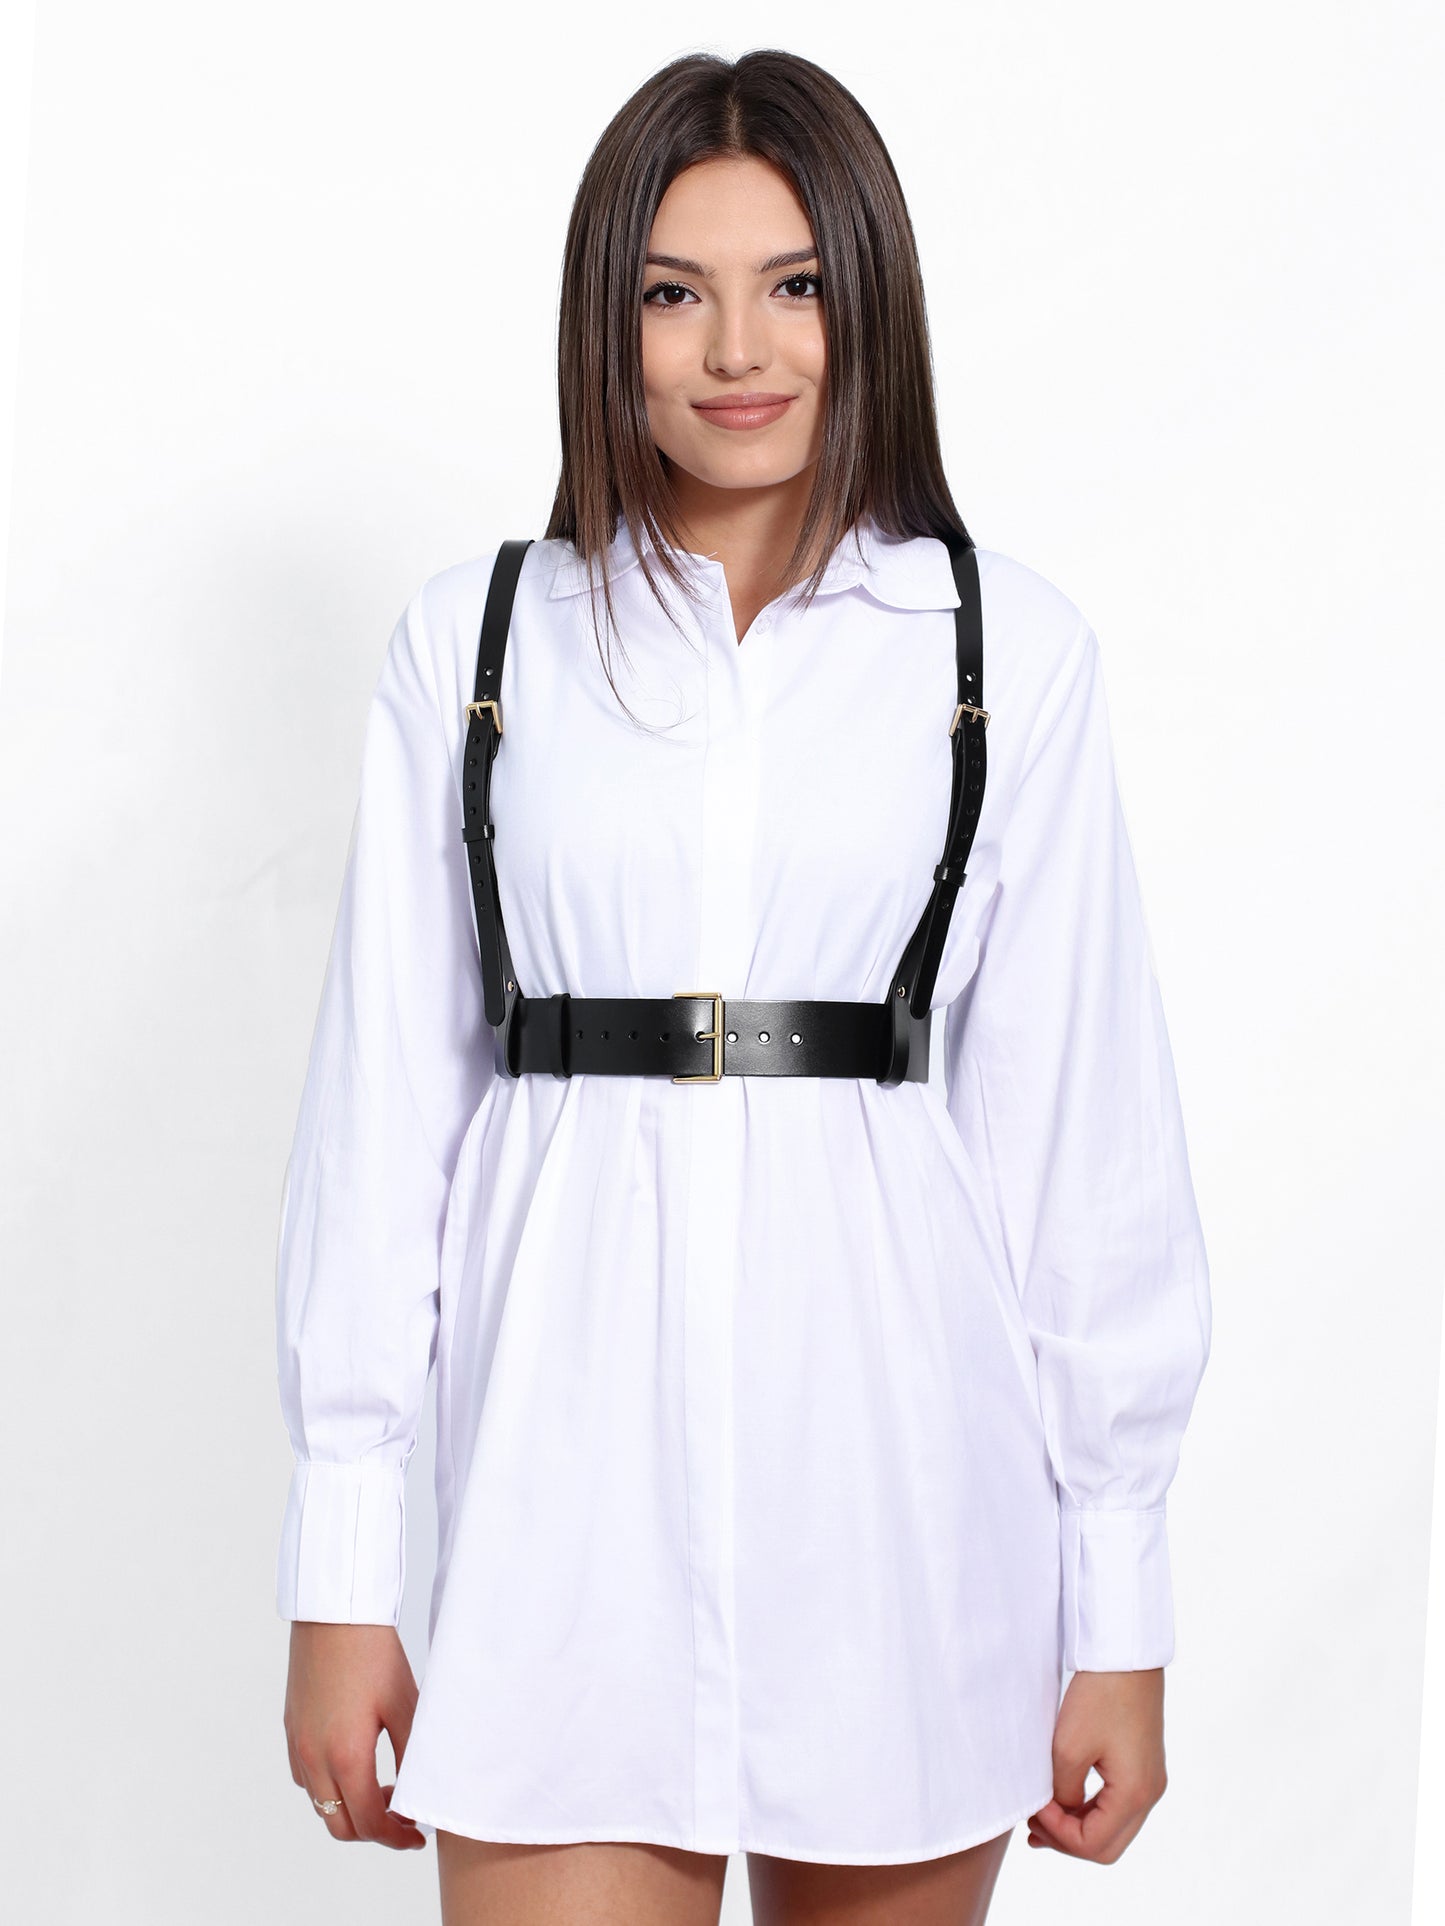 Black leather harness worn with white shirt.